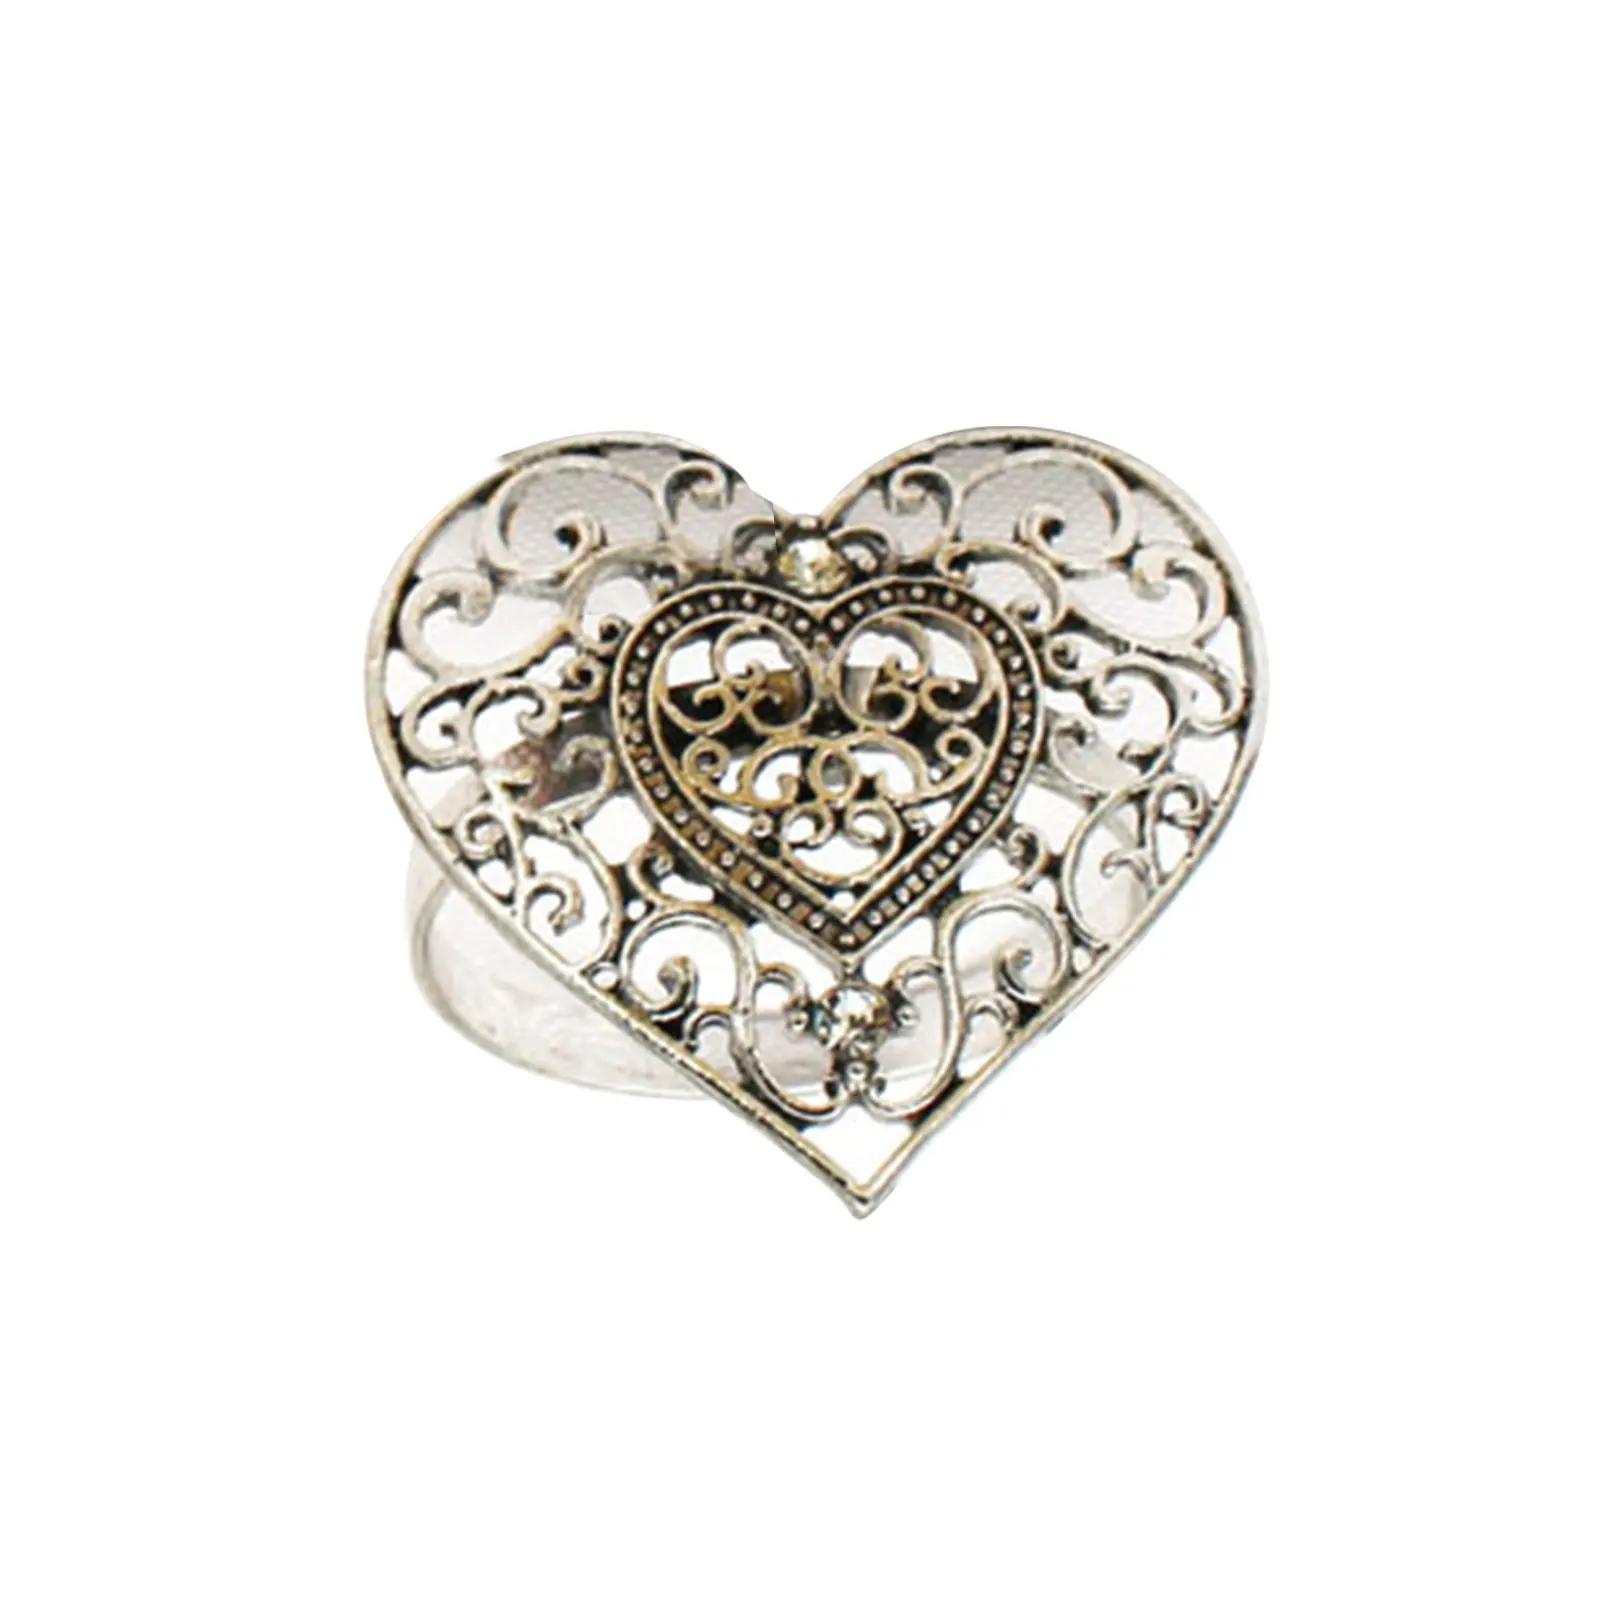 

1pcs Gold Silver Napkin Ring Chairs Buckles Heart Wedding Event Decoration Crafts Rhinestone Bows Holder Handmade Party Supplies